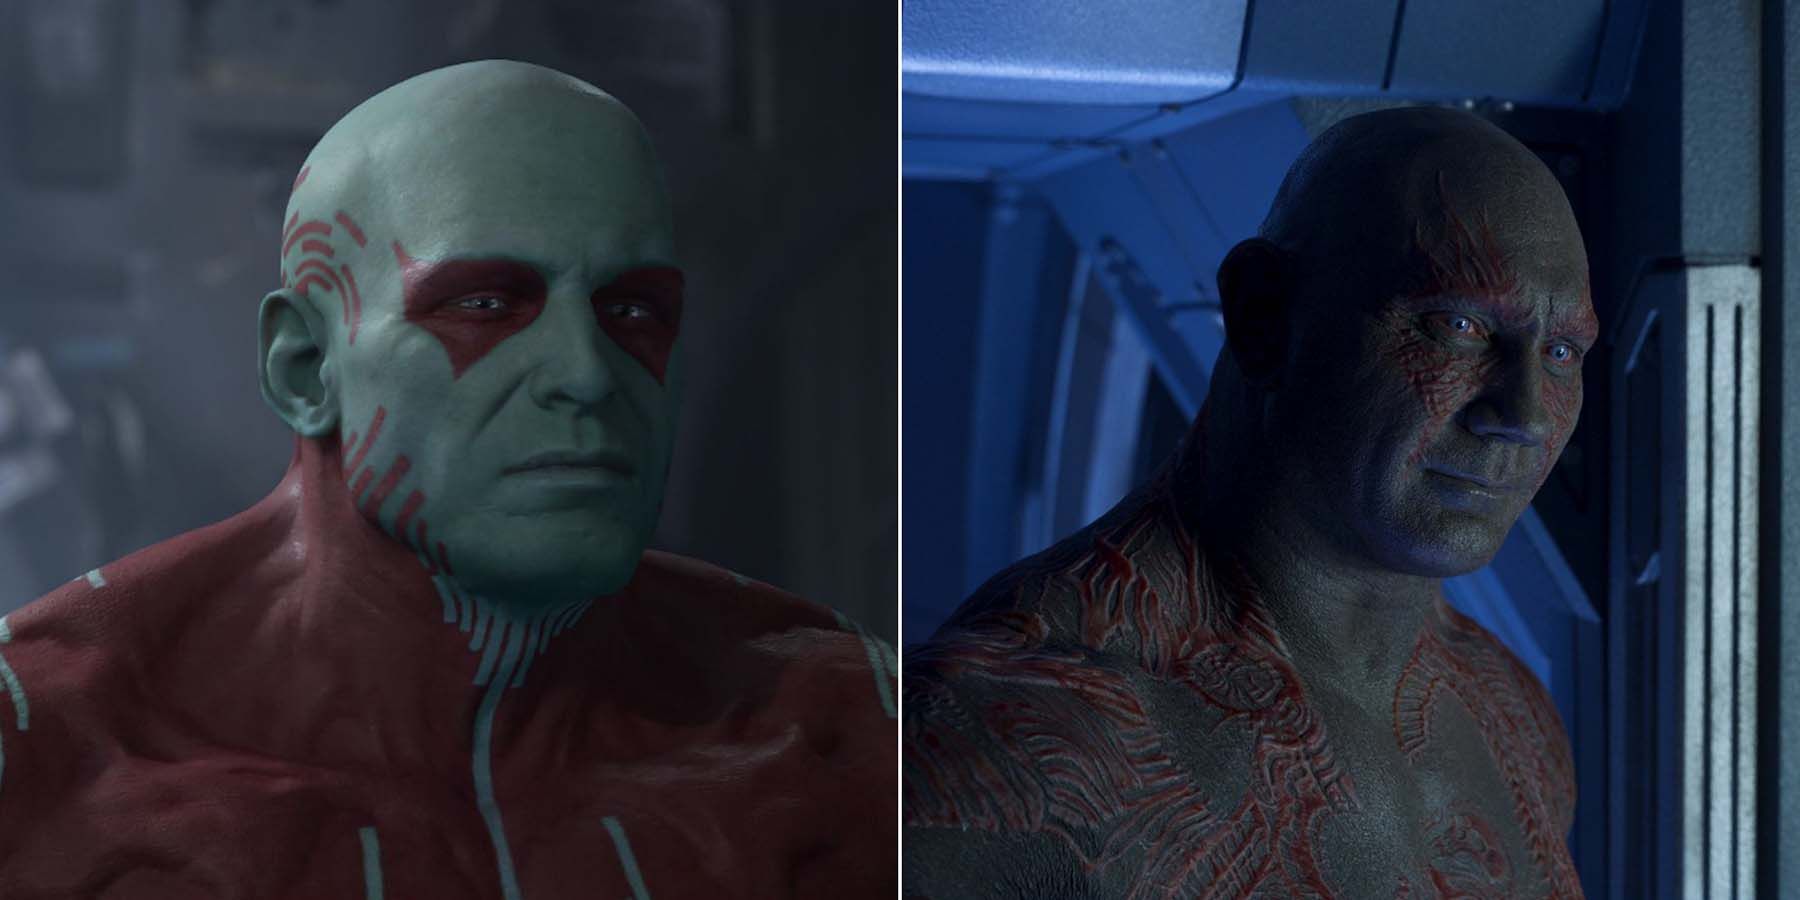 Marvel’s Guardians of the Galaxy drax movie and game